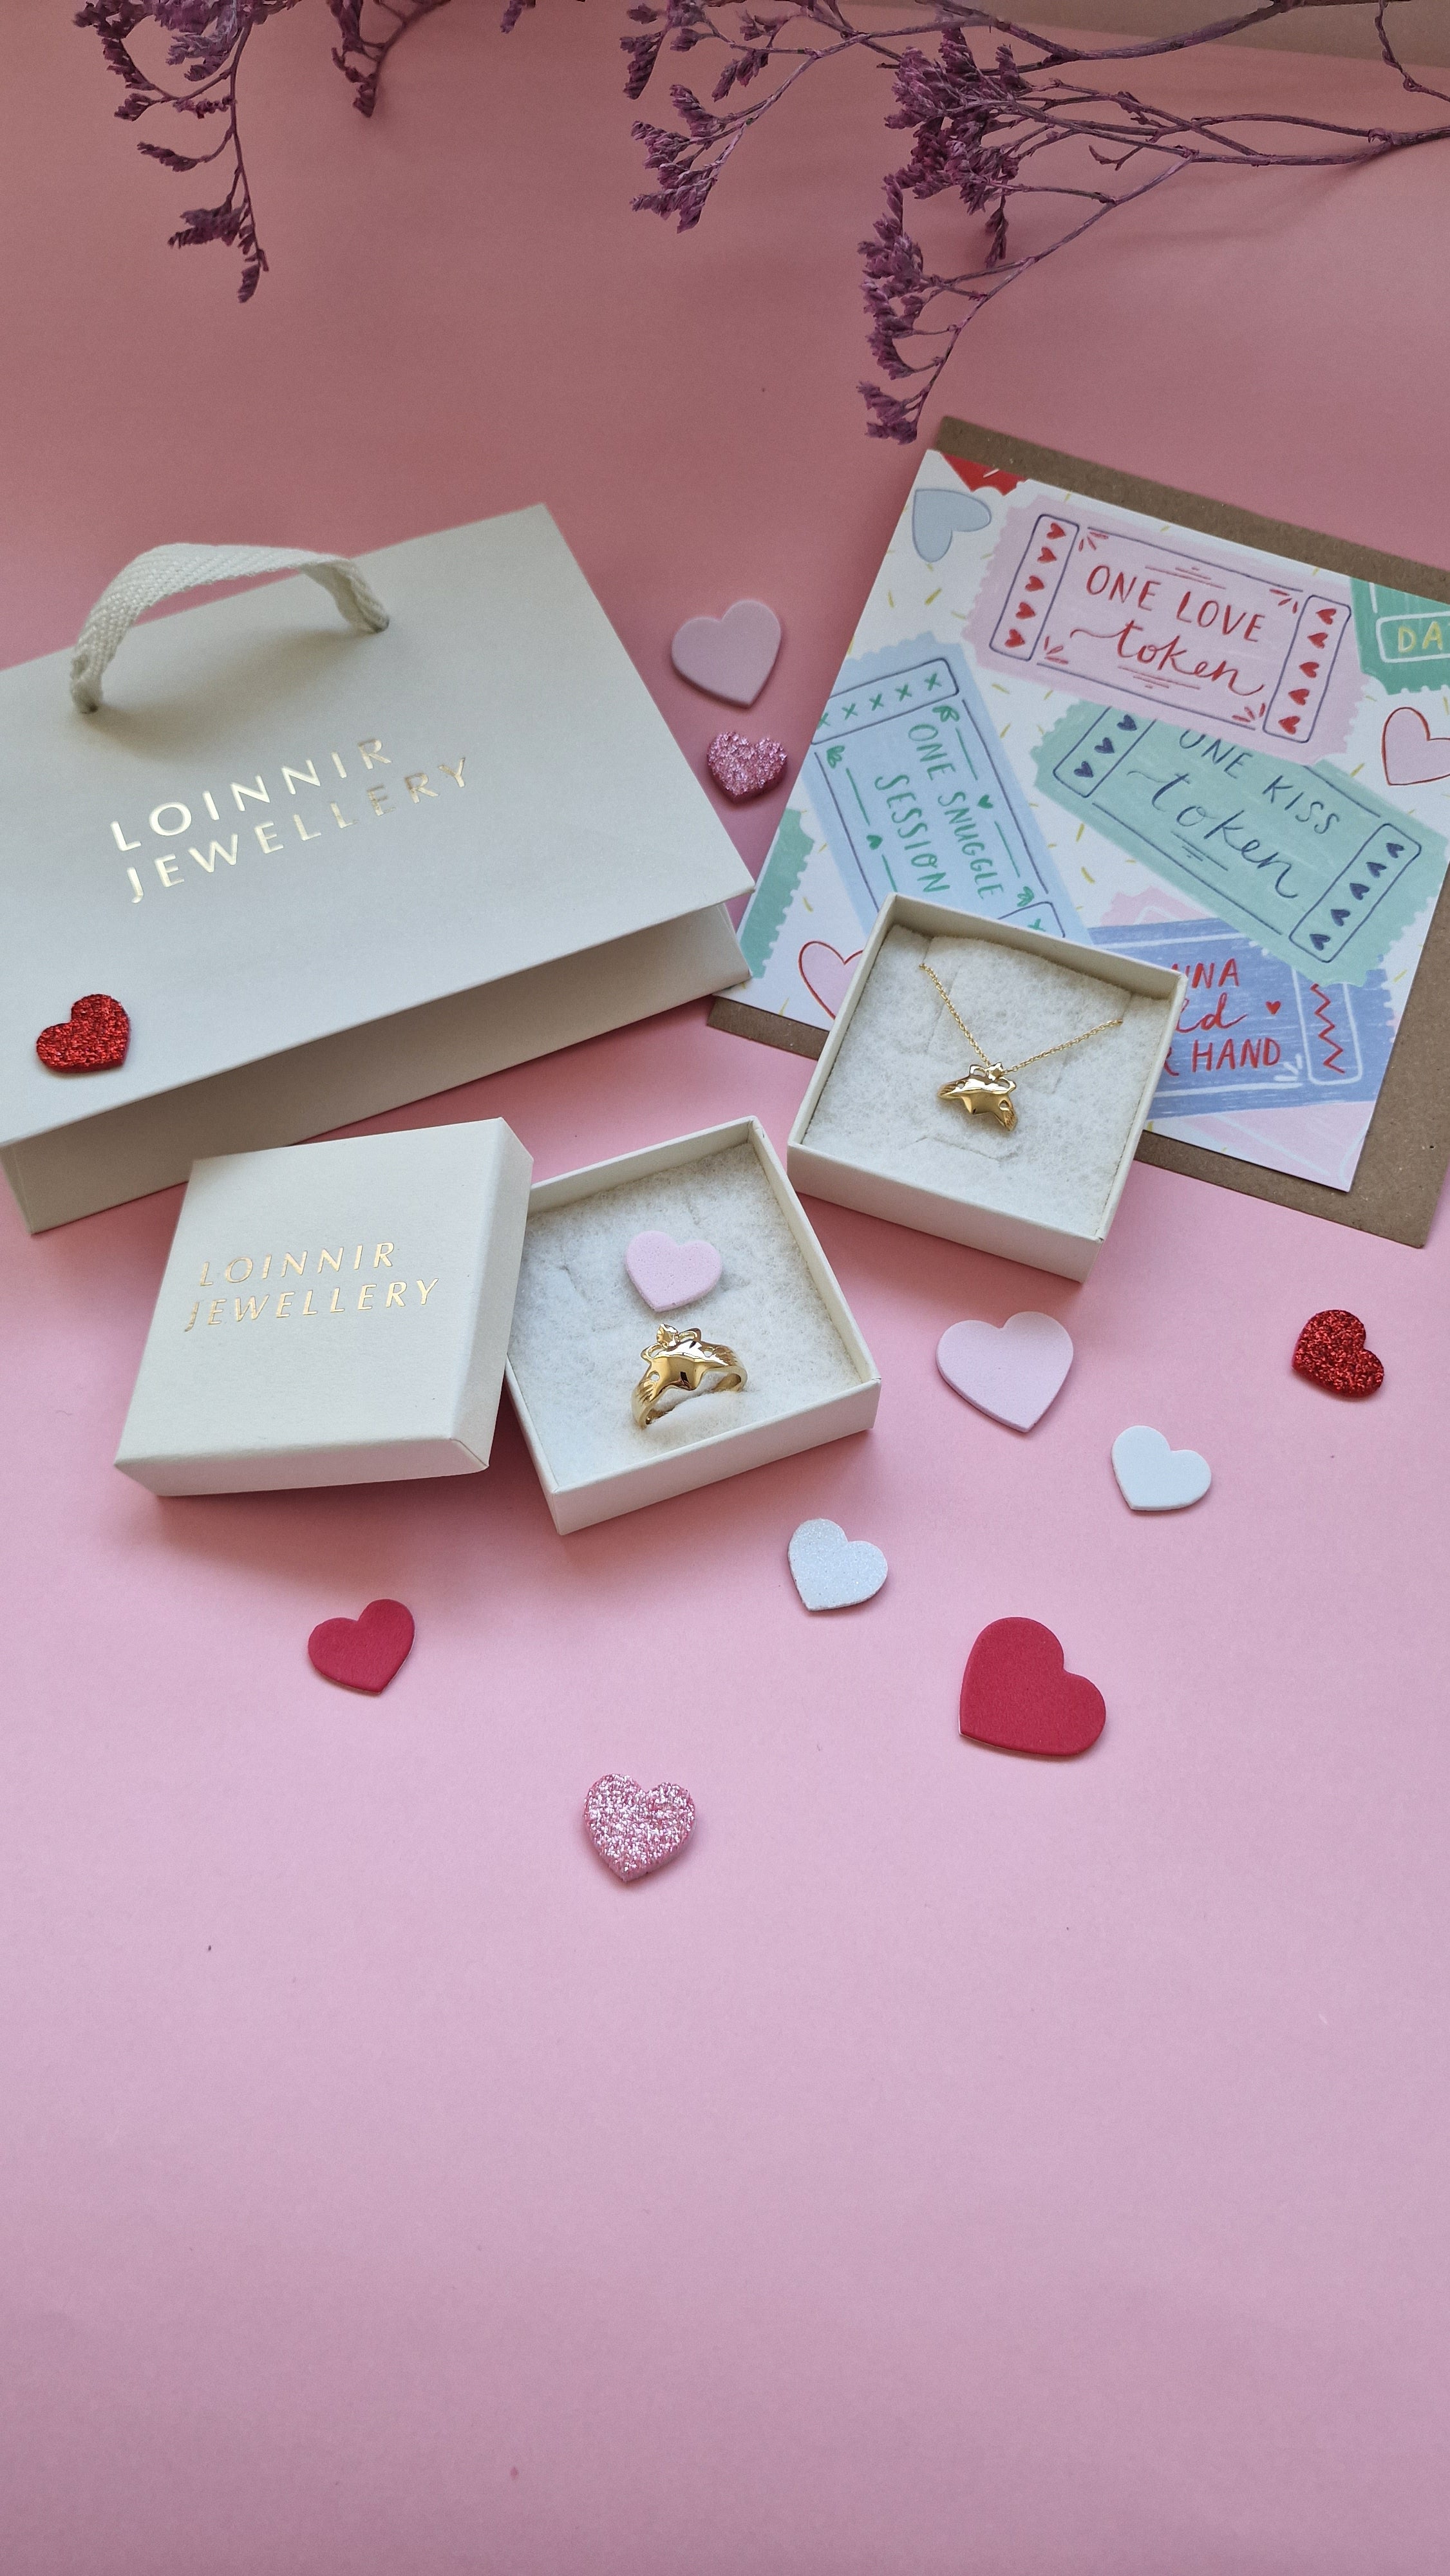 Discover the Magic of Love: Loinnir Jewellery's Unique Valentine's Day Collaboration with Pickled Pom Pom